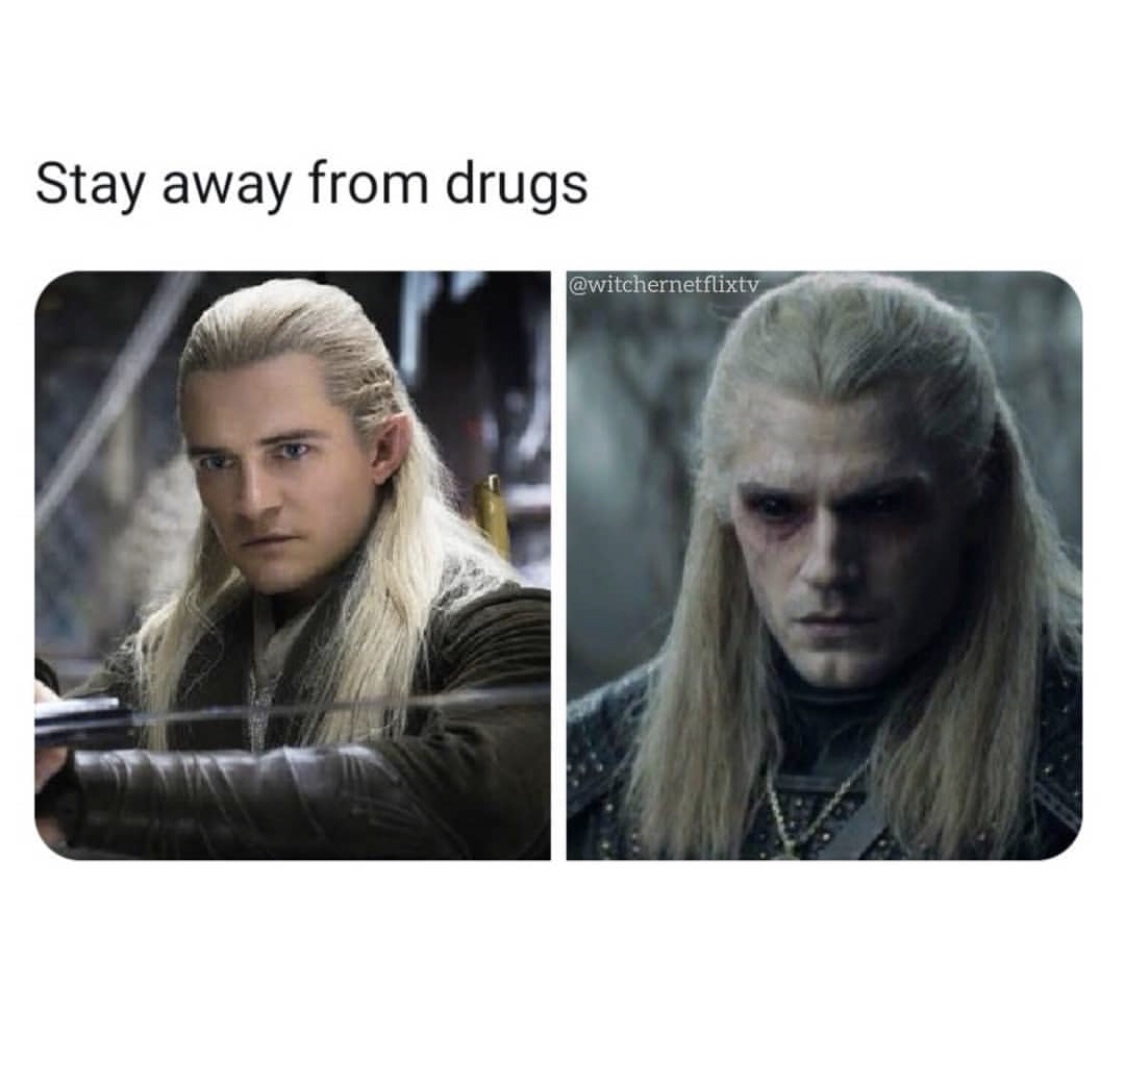 orlando bloom hobbit - Stay away from drugs